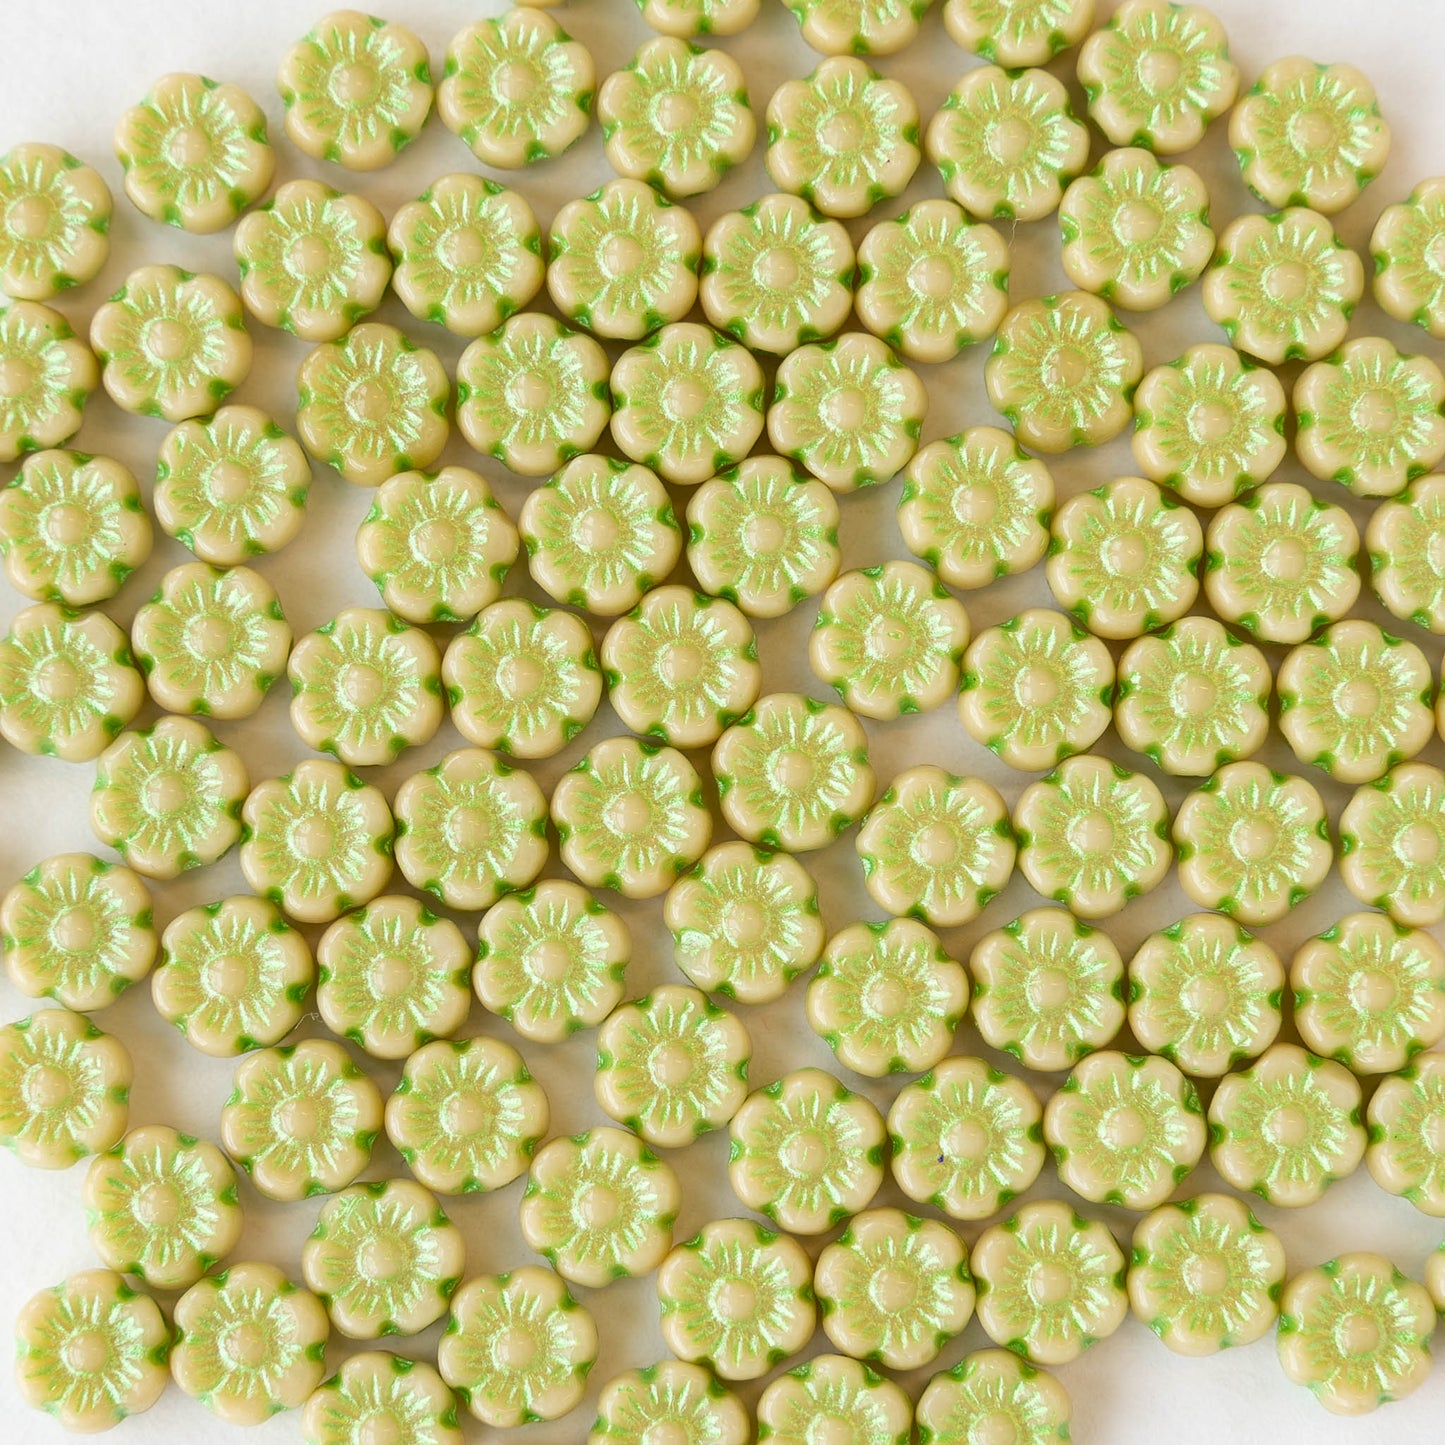 6mm Glass Flower Beads - Mellow Yellow with Green Wash - 30 beads